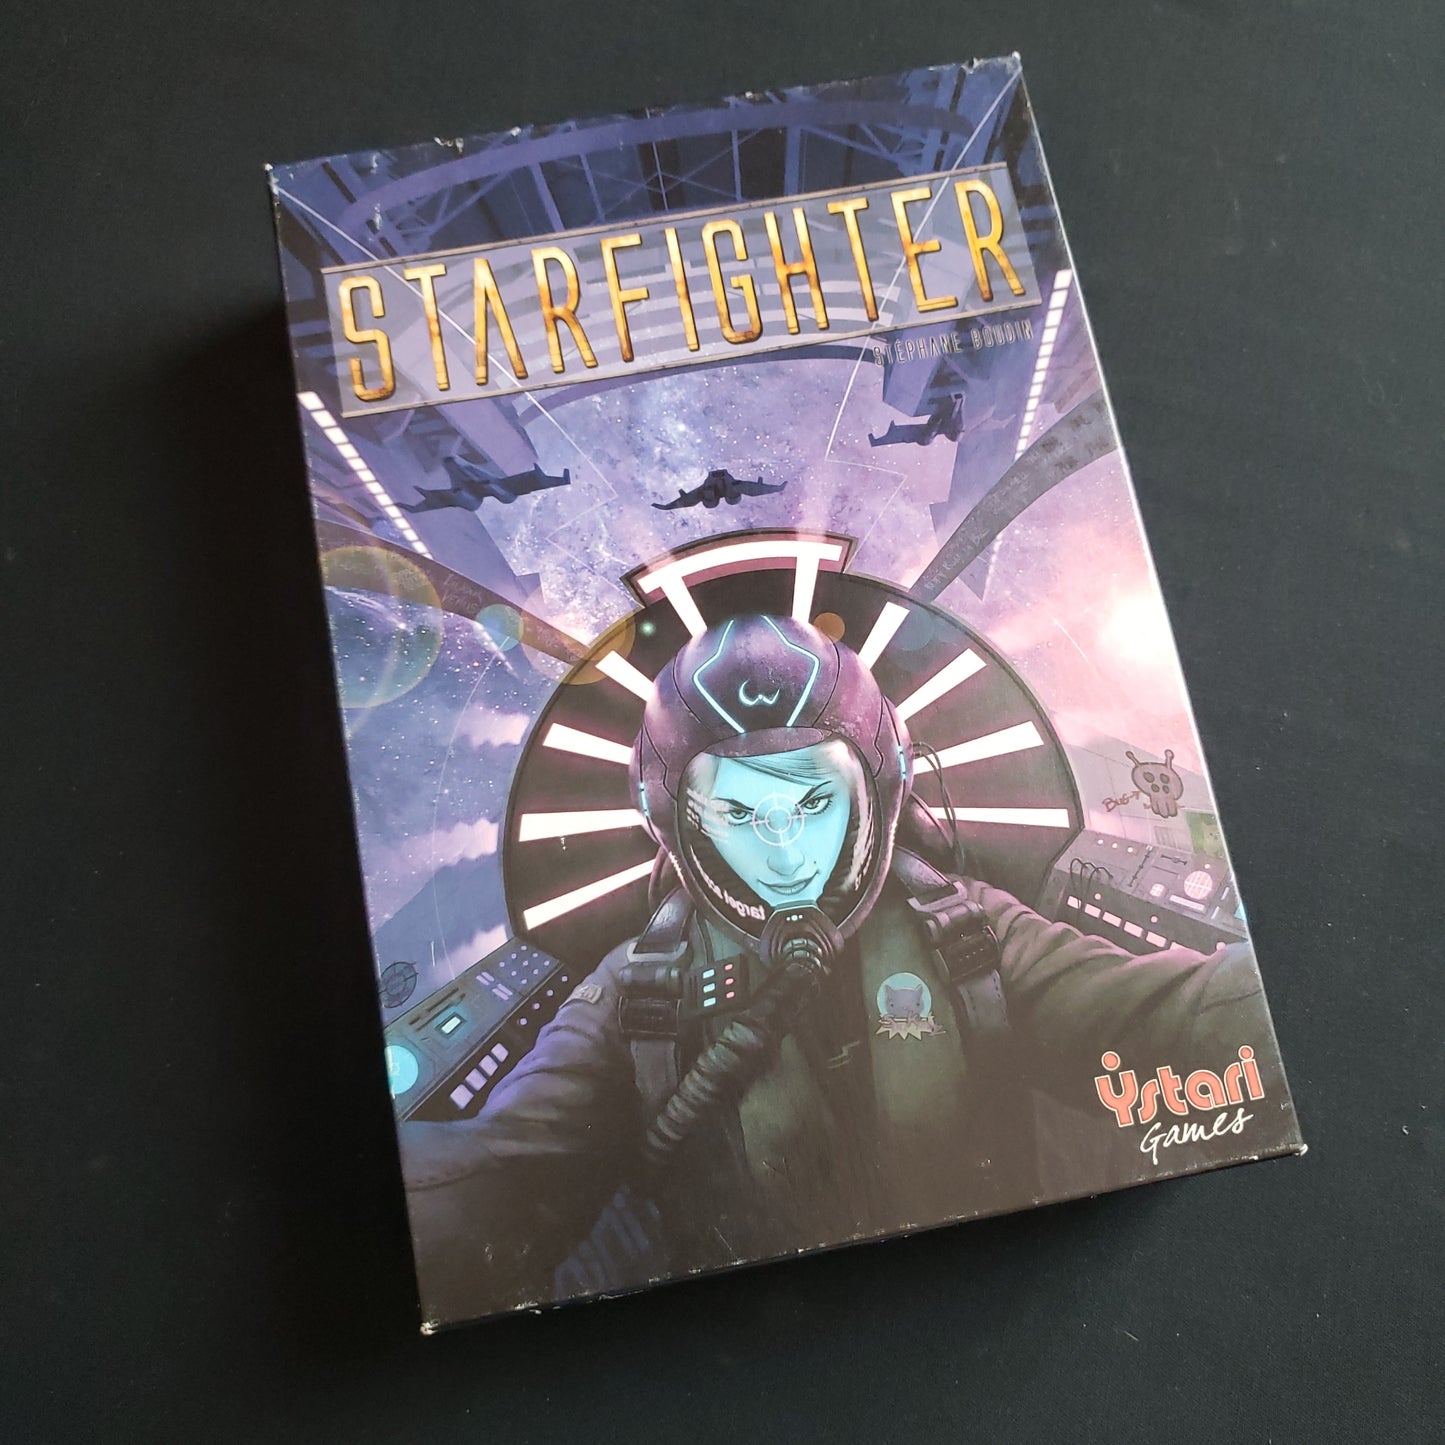 Image shows the front cover of the box of the Starfighter board game